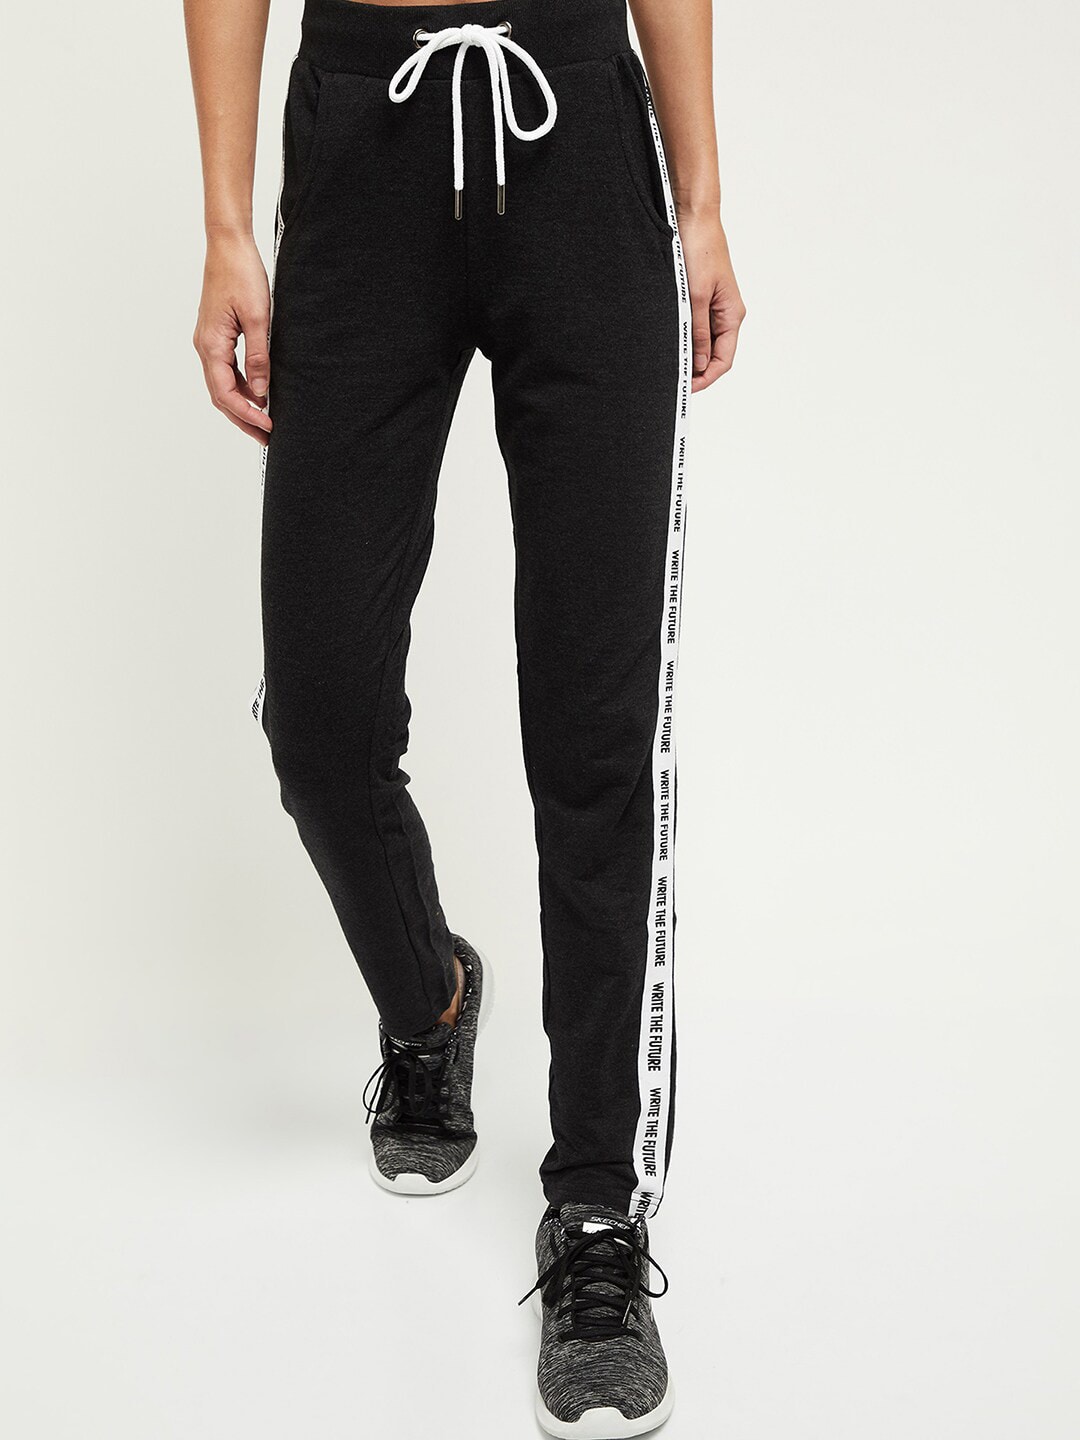 max Women Charcoal Grey & White Solid Track Pants Price in India